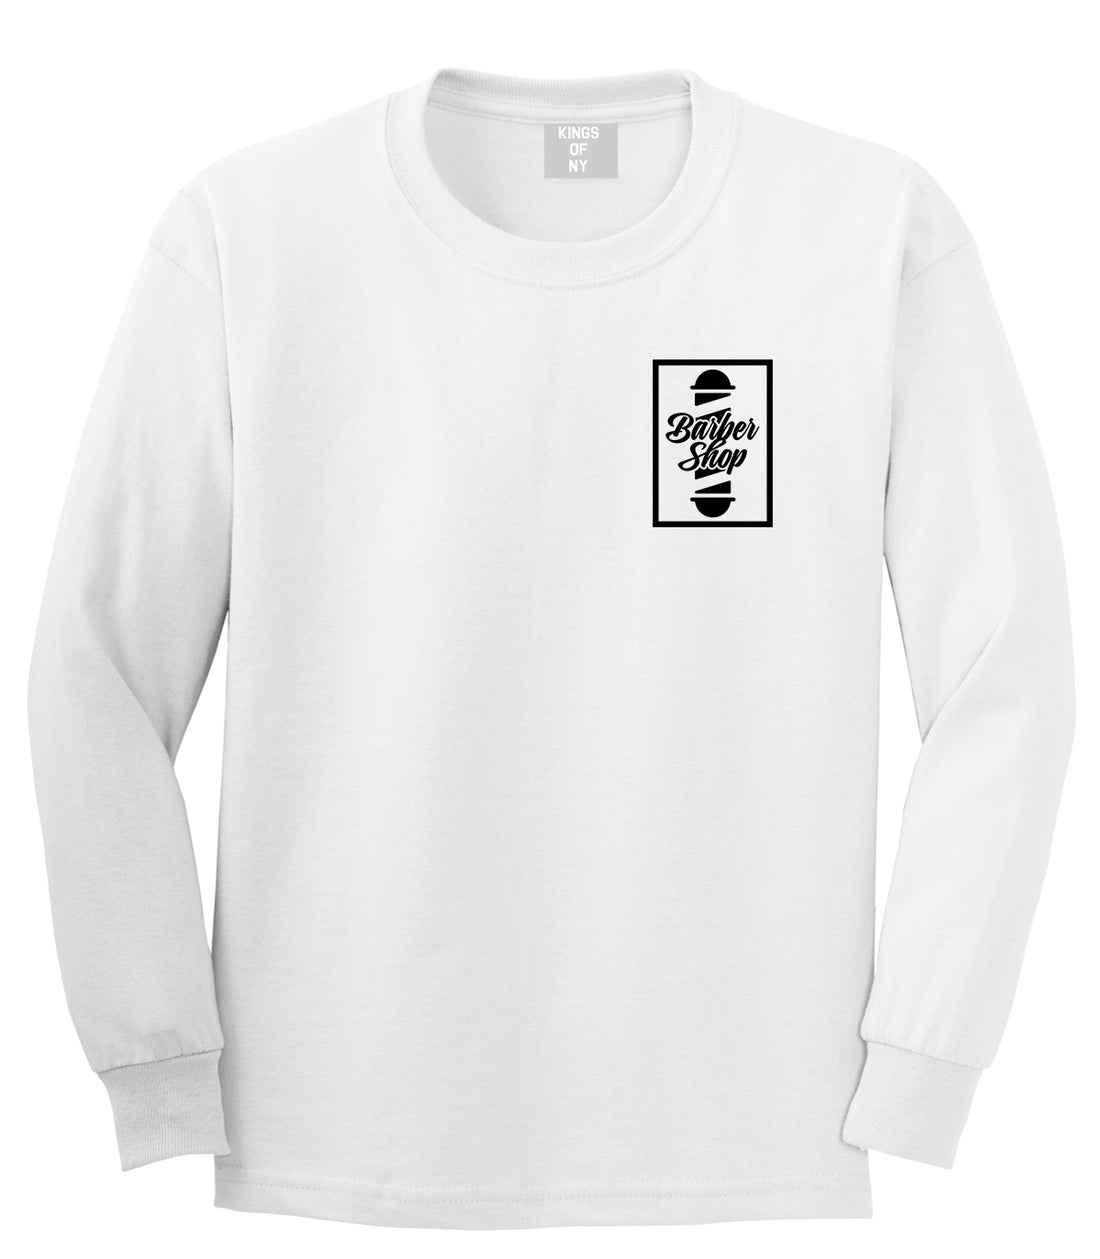 Barbershop Pole Chest White Long Sleeve T-Shirt by Kings Of NY